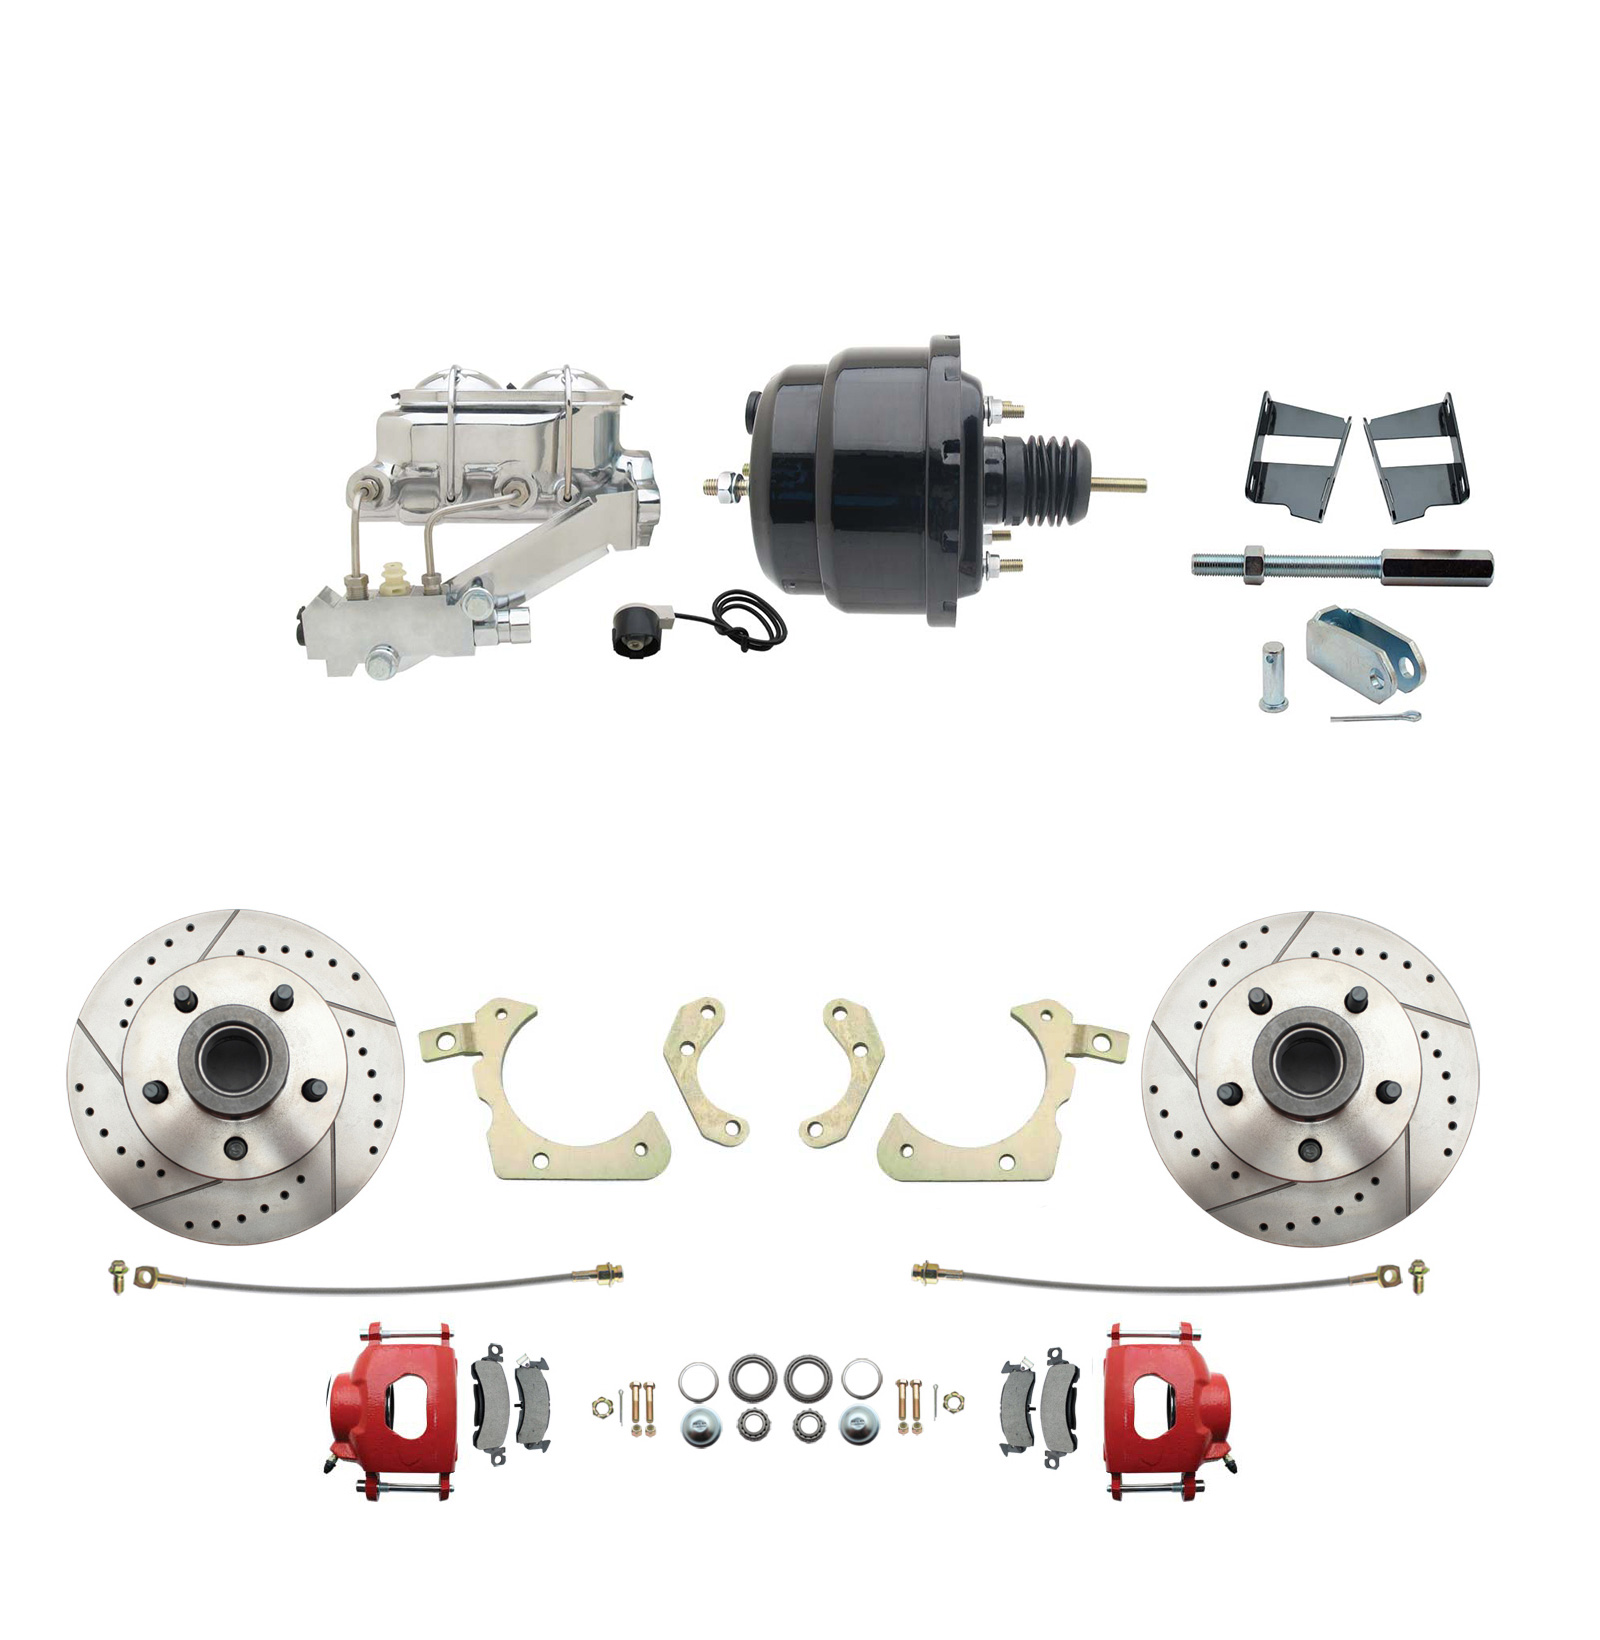 1959-1964 GM Full Size Front Disc Brake Kit Red Powder Coated Calipers Drilled/Slotted Rotors (Impala, Bel Air, Biscayne) & 8 Dual Powder Coated Black Booster Conversion Kit W/ Chrome Master Cylinder Left Mount Disc/ Drum Pro